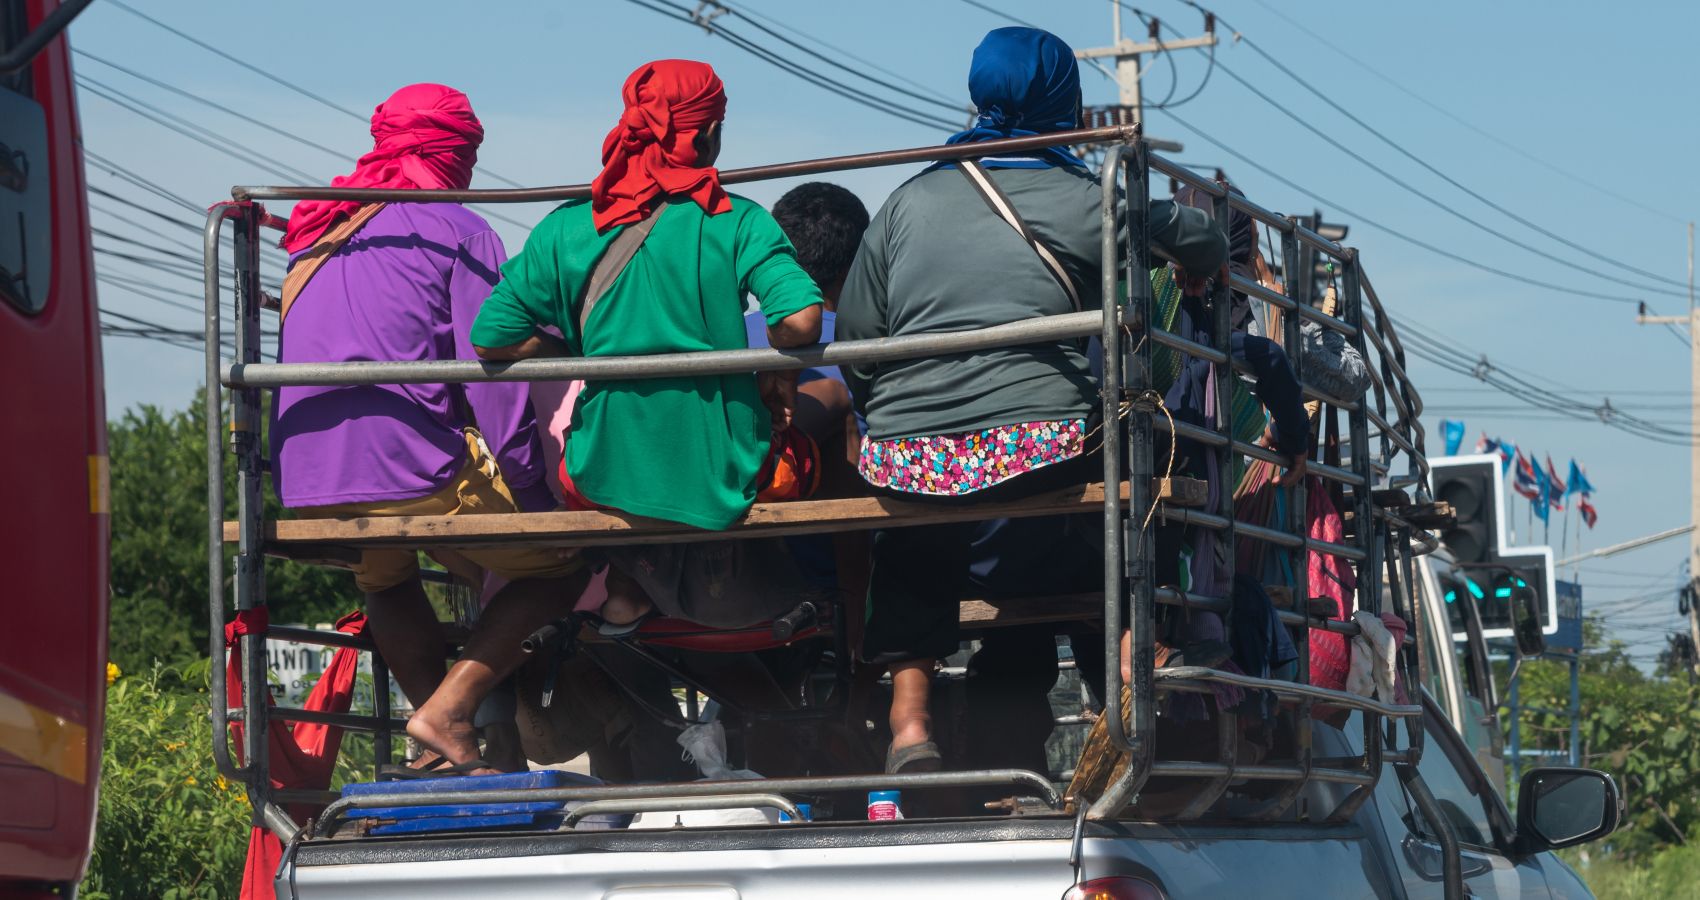 People on a Pikcup Truck in Thailand